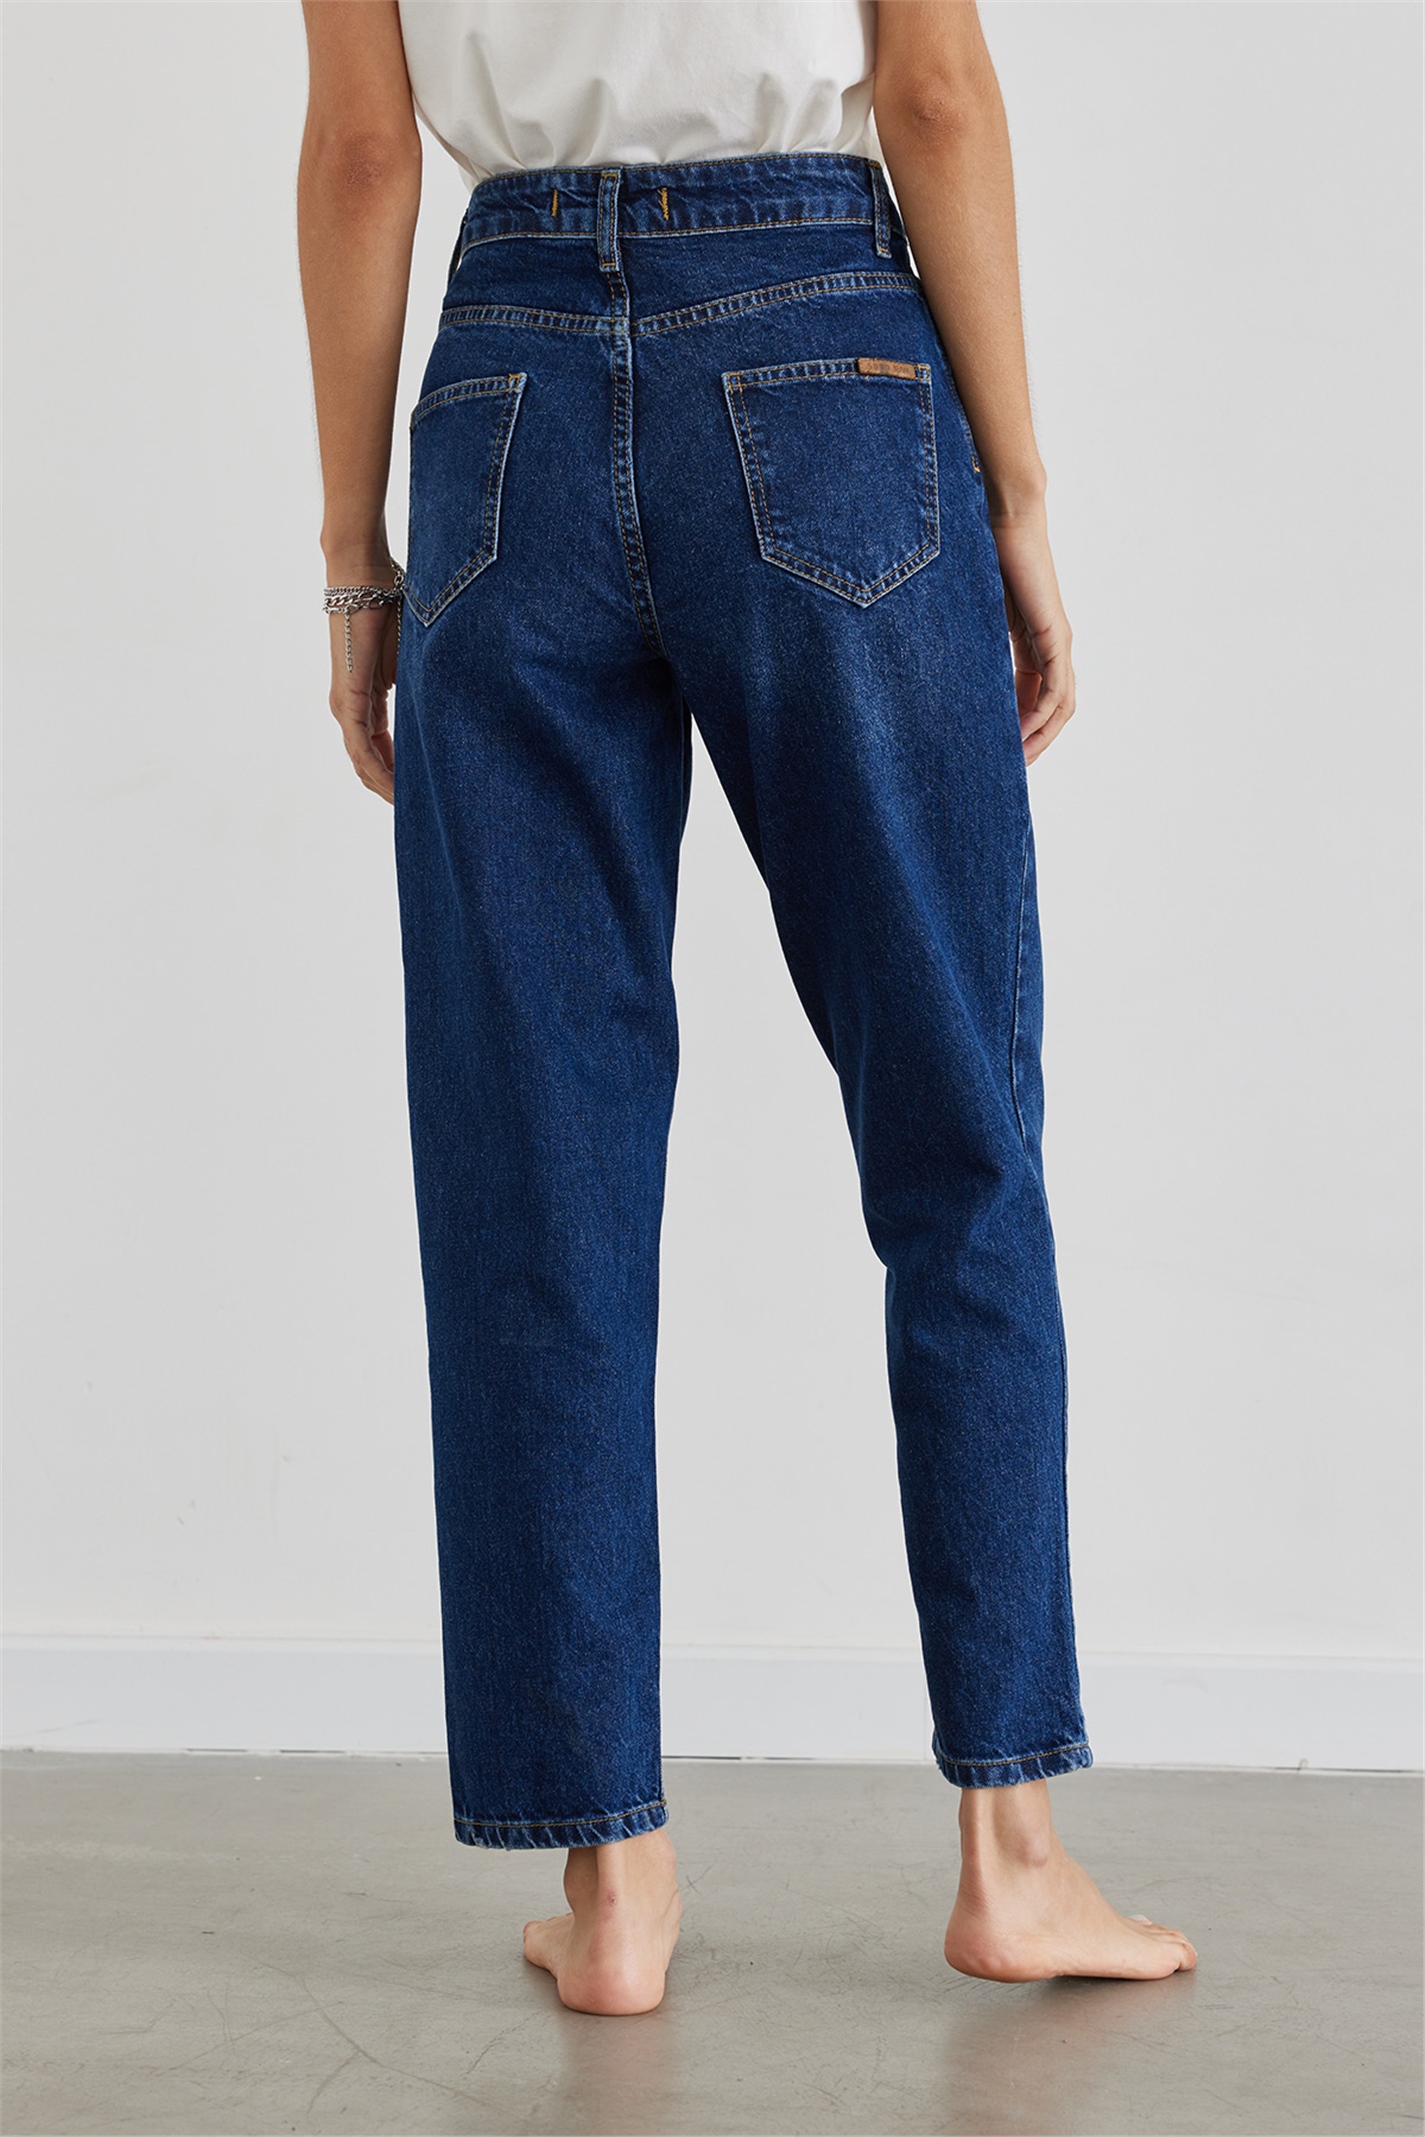 Navy Blue Mom Jeans | Suud Collection